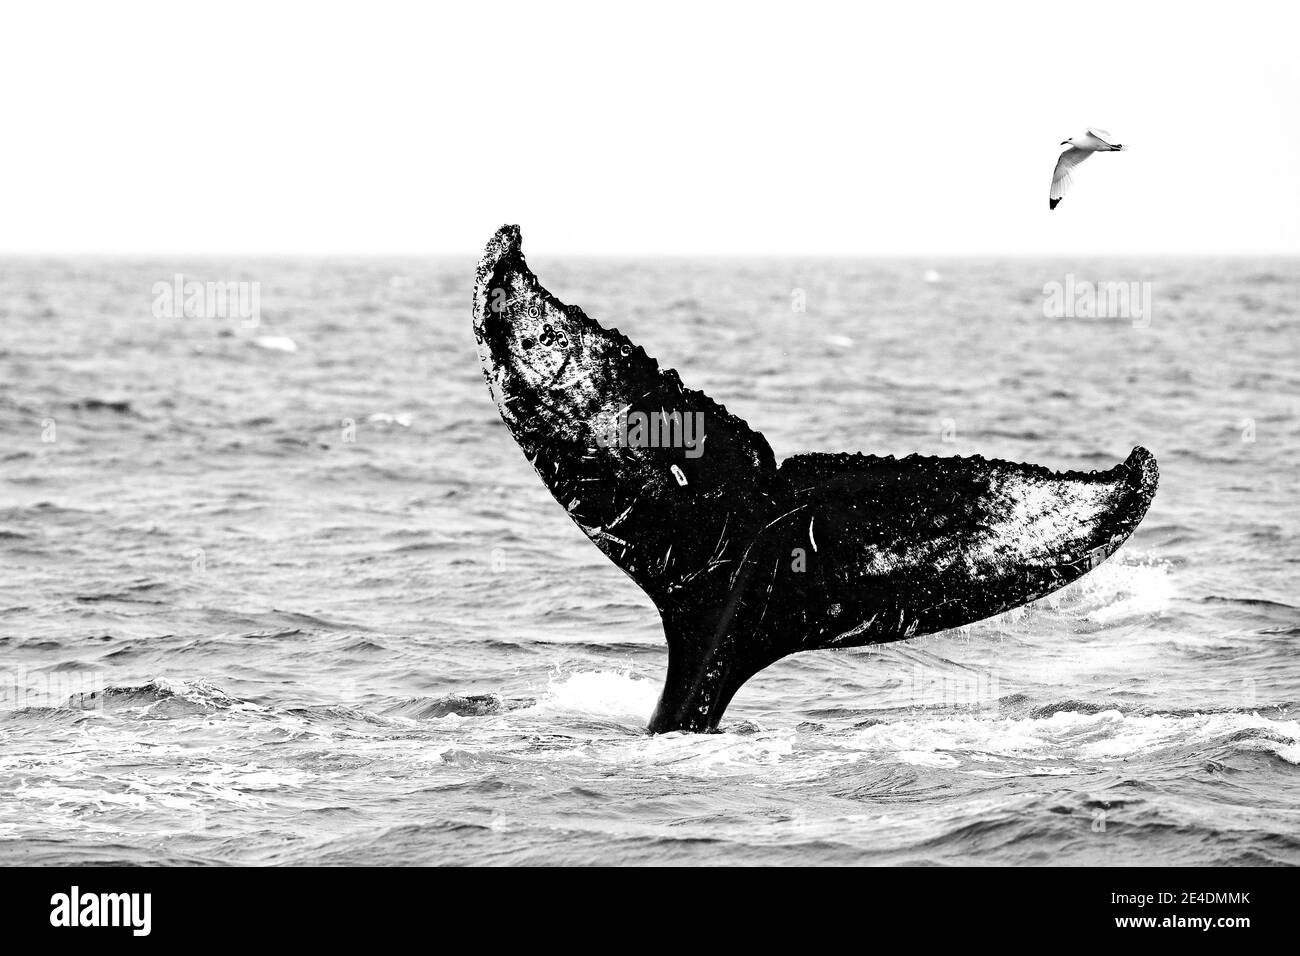 Black and white nature art, whale and gull.  Humpback whale, Megaptera novaeangliae, tail caudal fin of baleen whale in the sea water. Wildlife scene Stock Photo